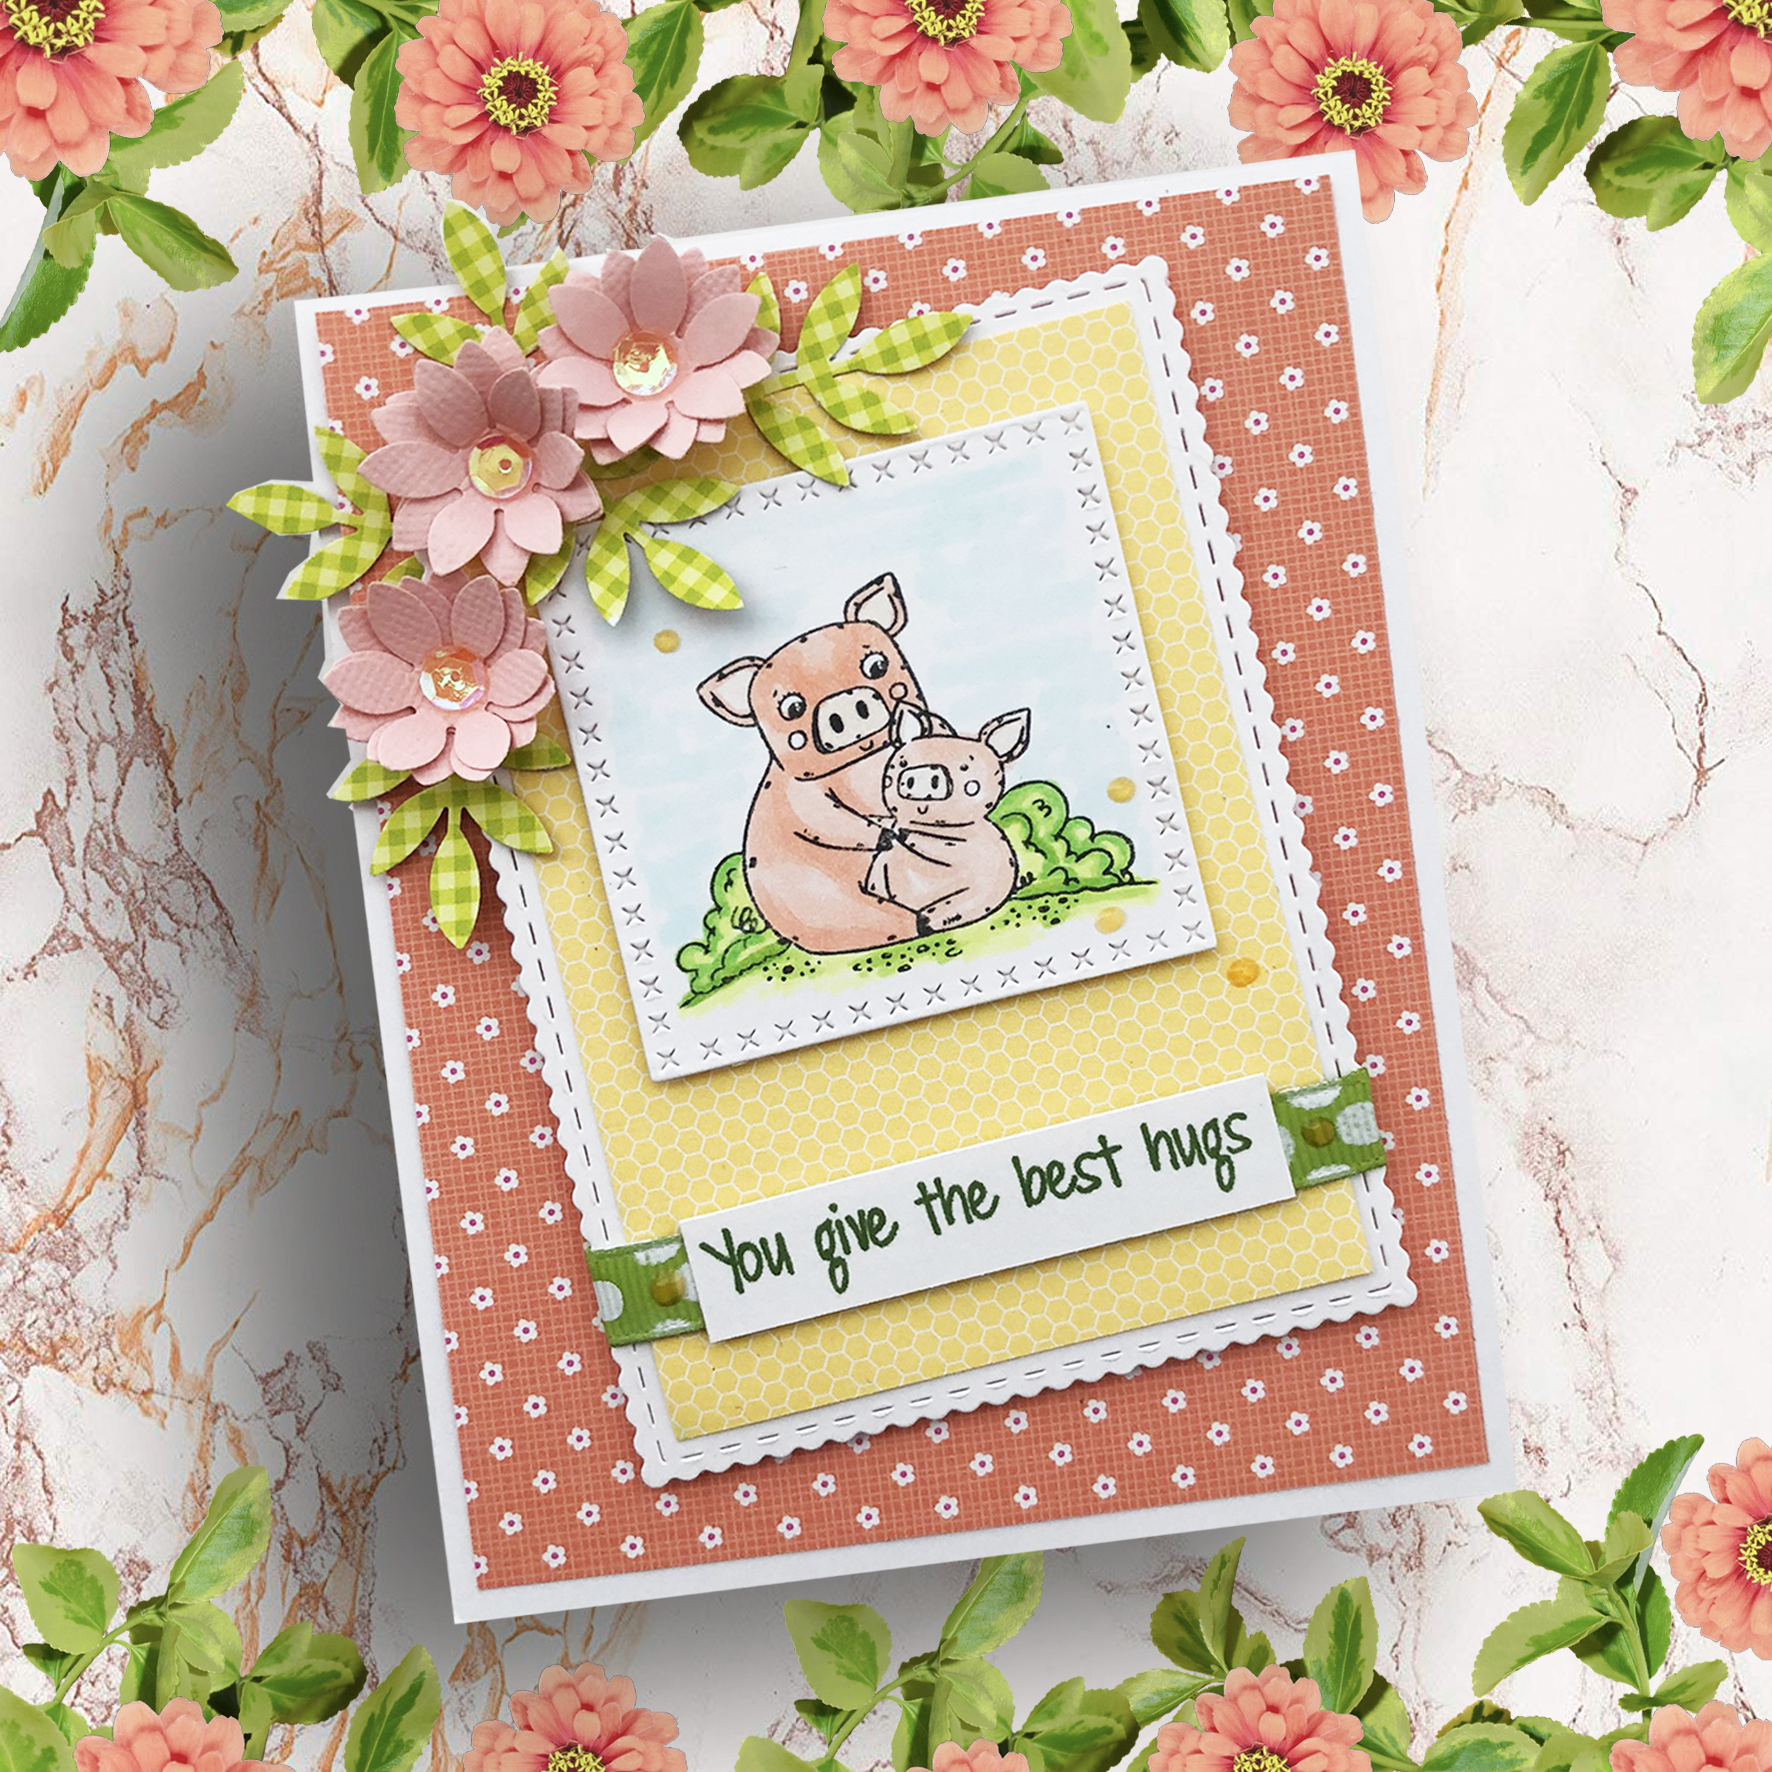 Easy DIY Mother's Day Card created with animal images and sweet sentiment from the Mother's Day Love stamp set from Joy Clair Designs. This card has flowers die cuts that complete the design.